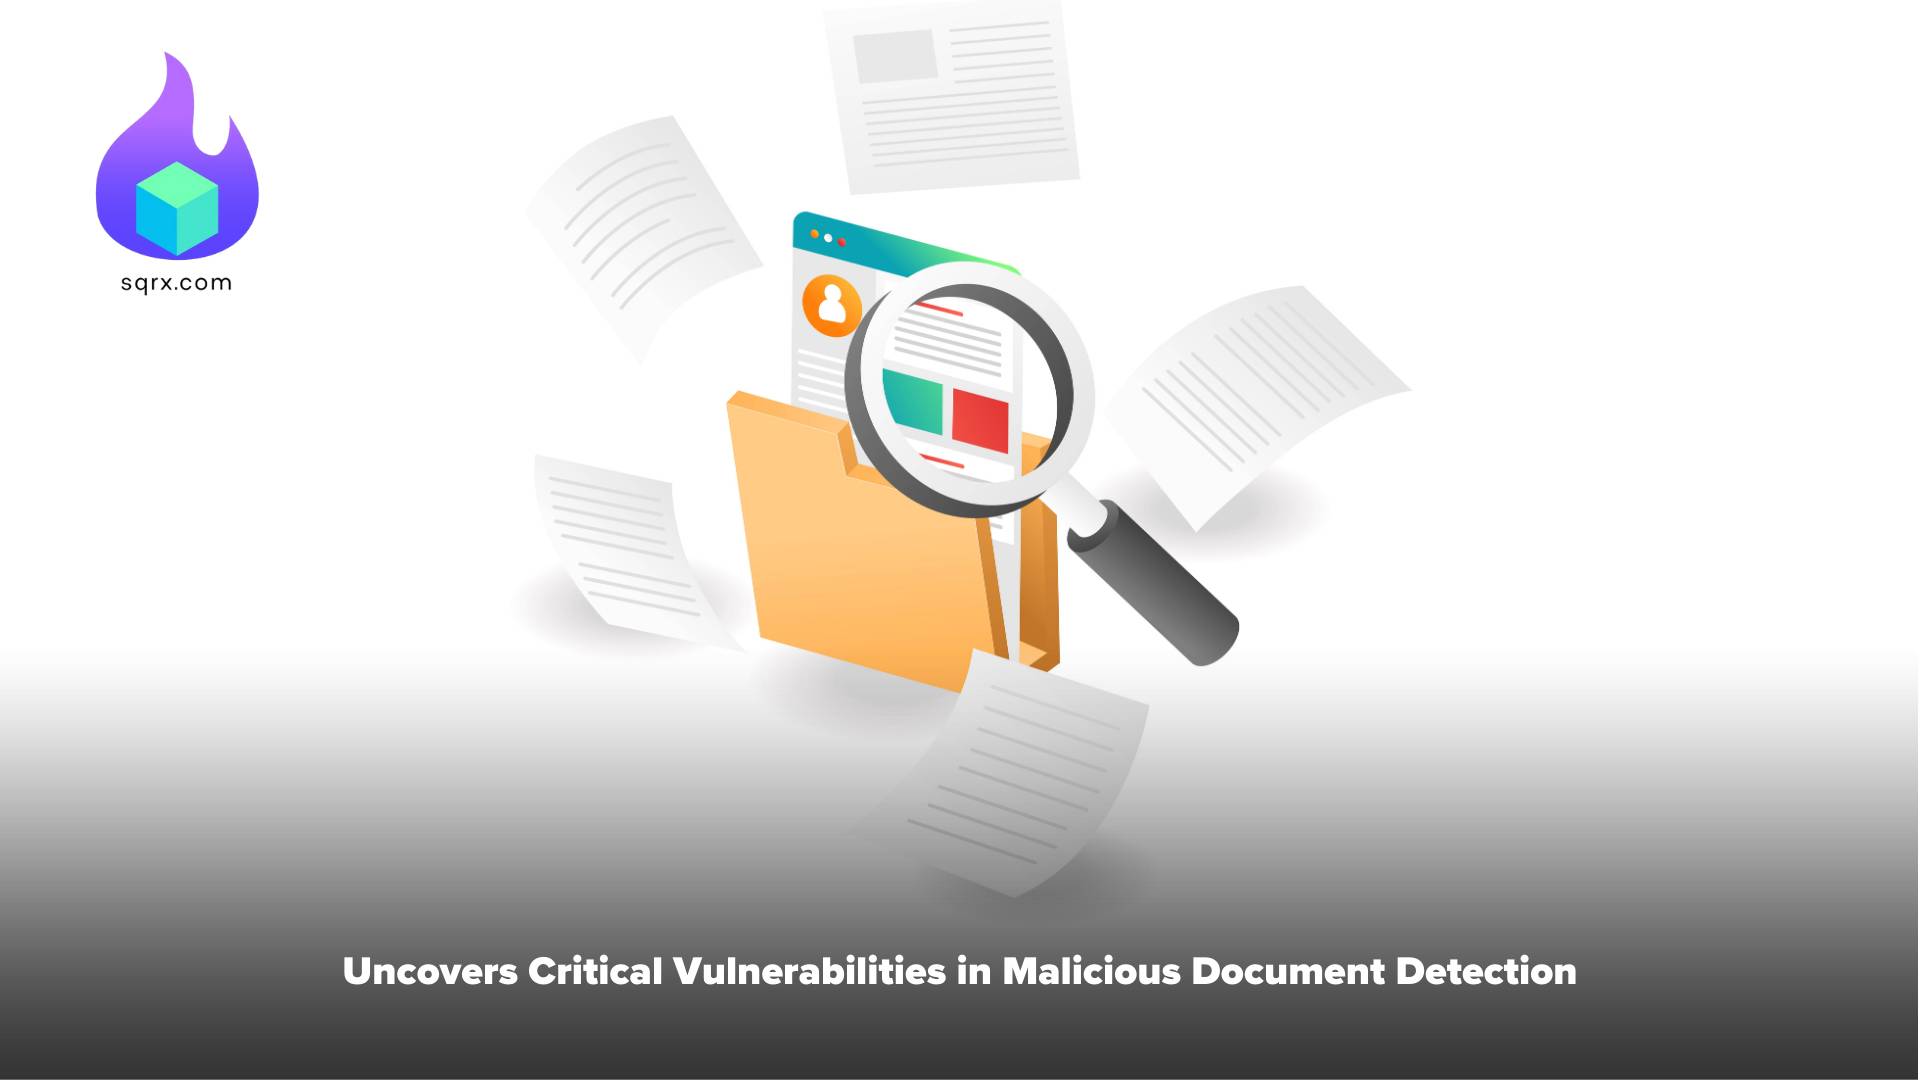 SquareX Uncovers Critical Vulnerabilities in Malicious Document Detection Among Top Webmail Providers Like Gmail, Outlook